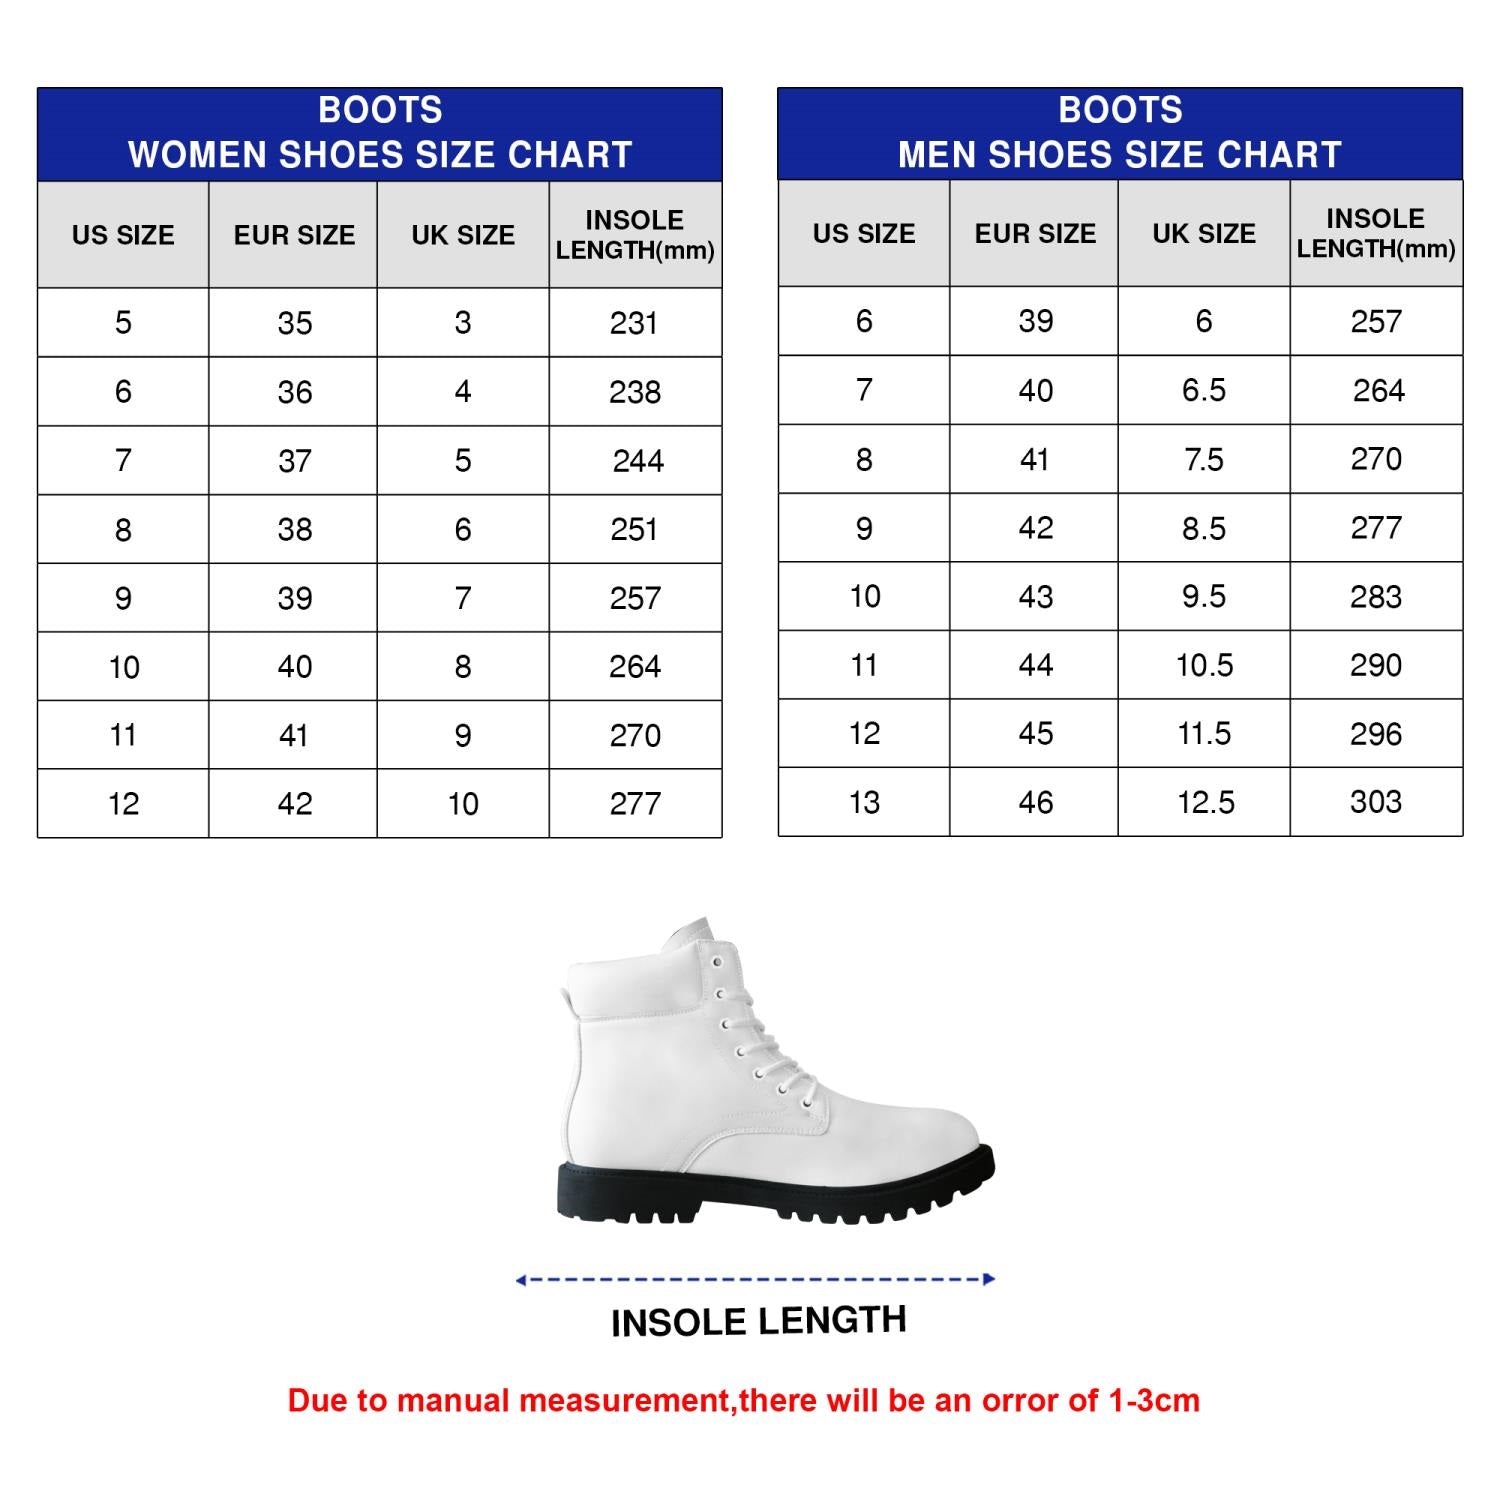 Jesus Cross Metal Tbl Boots - Christian Shoes For Men And Women